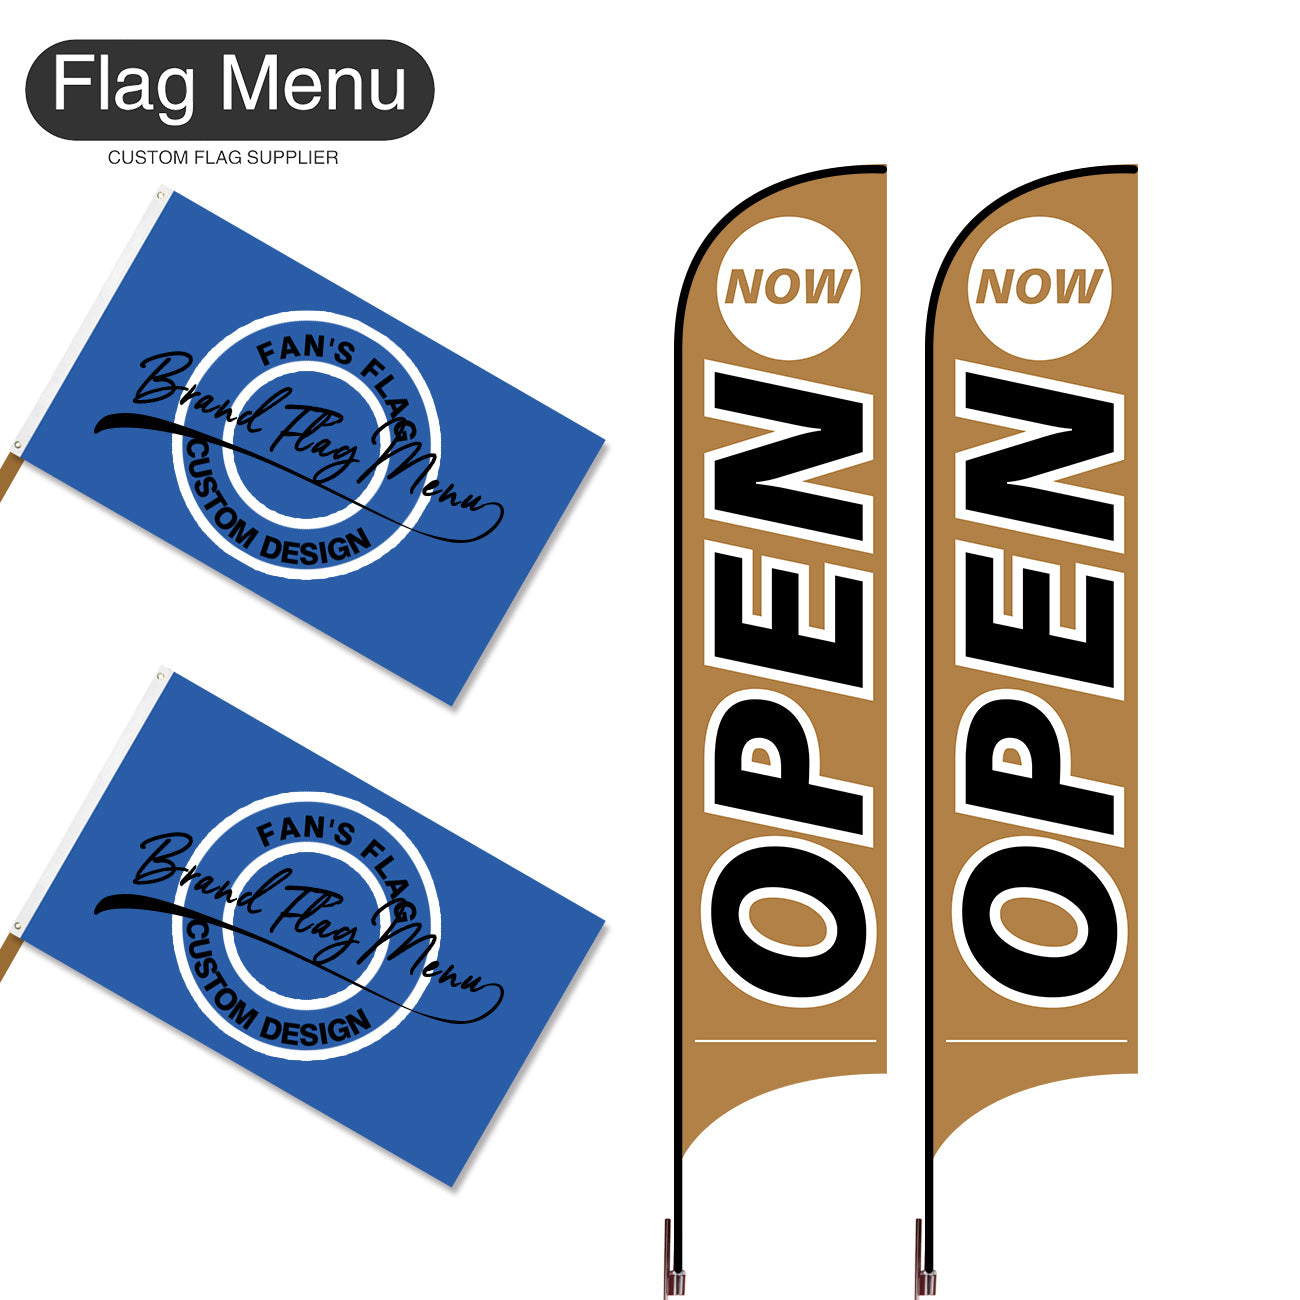 Outdoor Advertising Set - B-Brown-S - Feather Flag -Double Sided & 3'x5' Regular Flag -Single Sided-Cross & Water Bag-Flag Menu